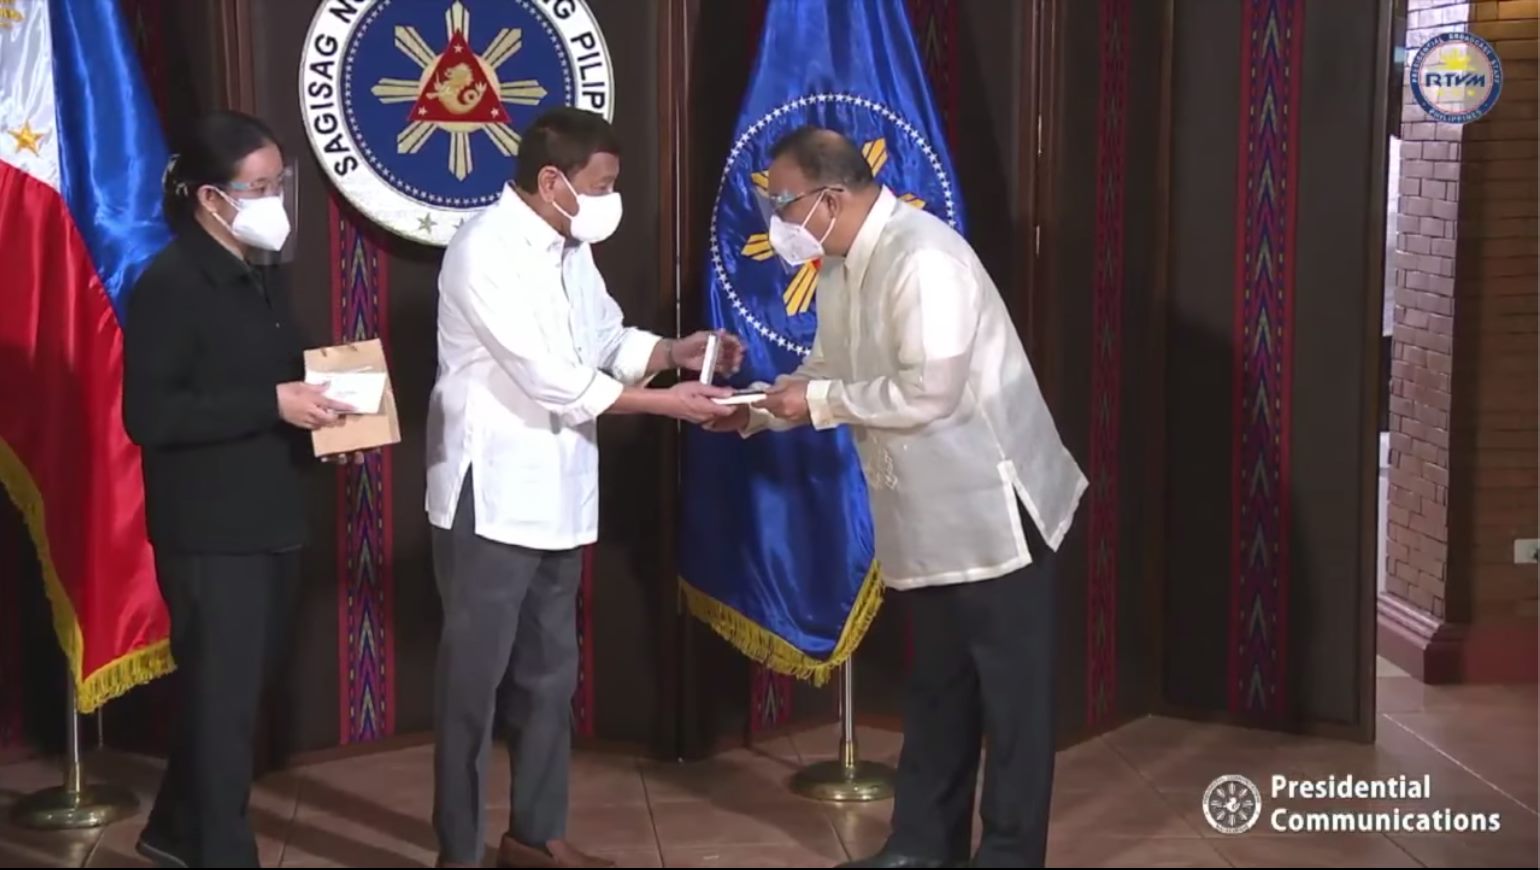  Dr. Rodney Dofitas (right), chief of PGH’s Division of Surgical Oncology and a product of PLM’s Master in Business Administration-Top Executive Program, was conferred the Order of Lapu-Lapu along with 8 others on Wednesday, June 2, for their quick action that saved the lives of patients in the government-run hospital in Manila. Dr. Dofitas led coordination efforts to respond to the fire and oversee the evacuation of patients and personnel.